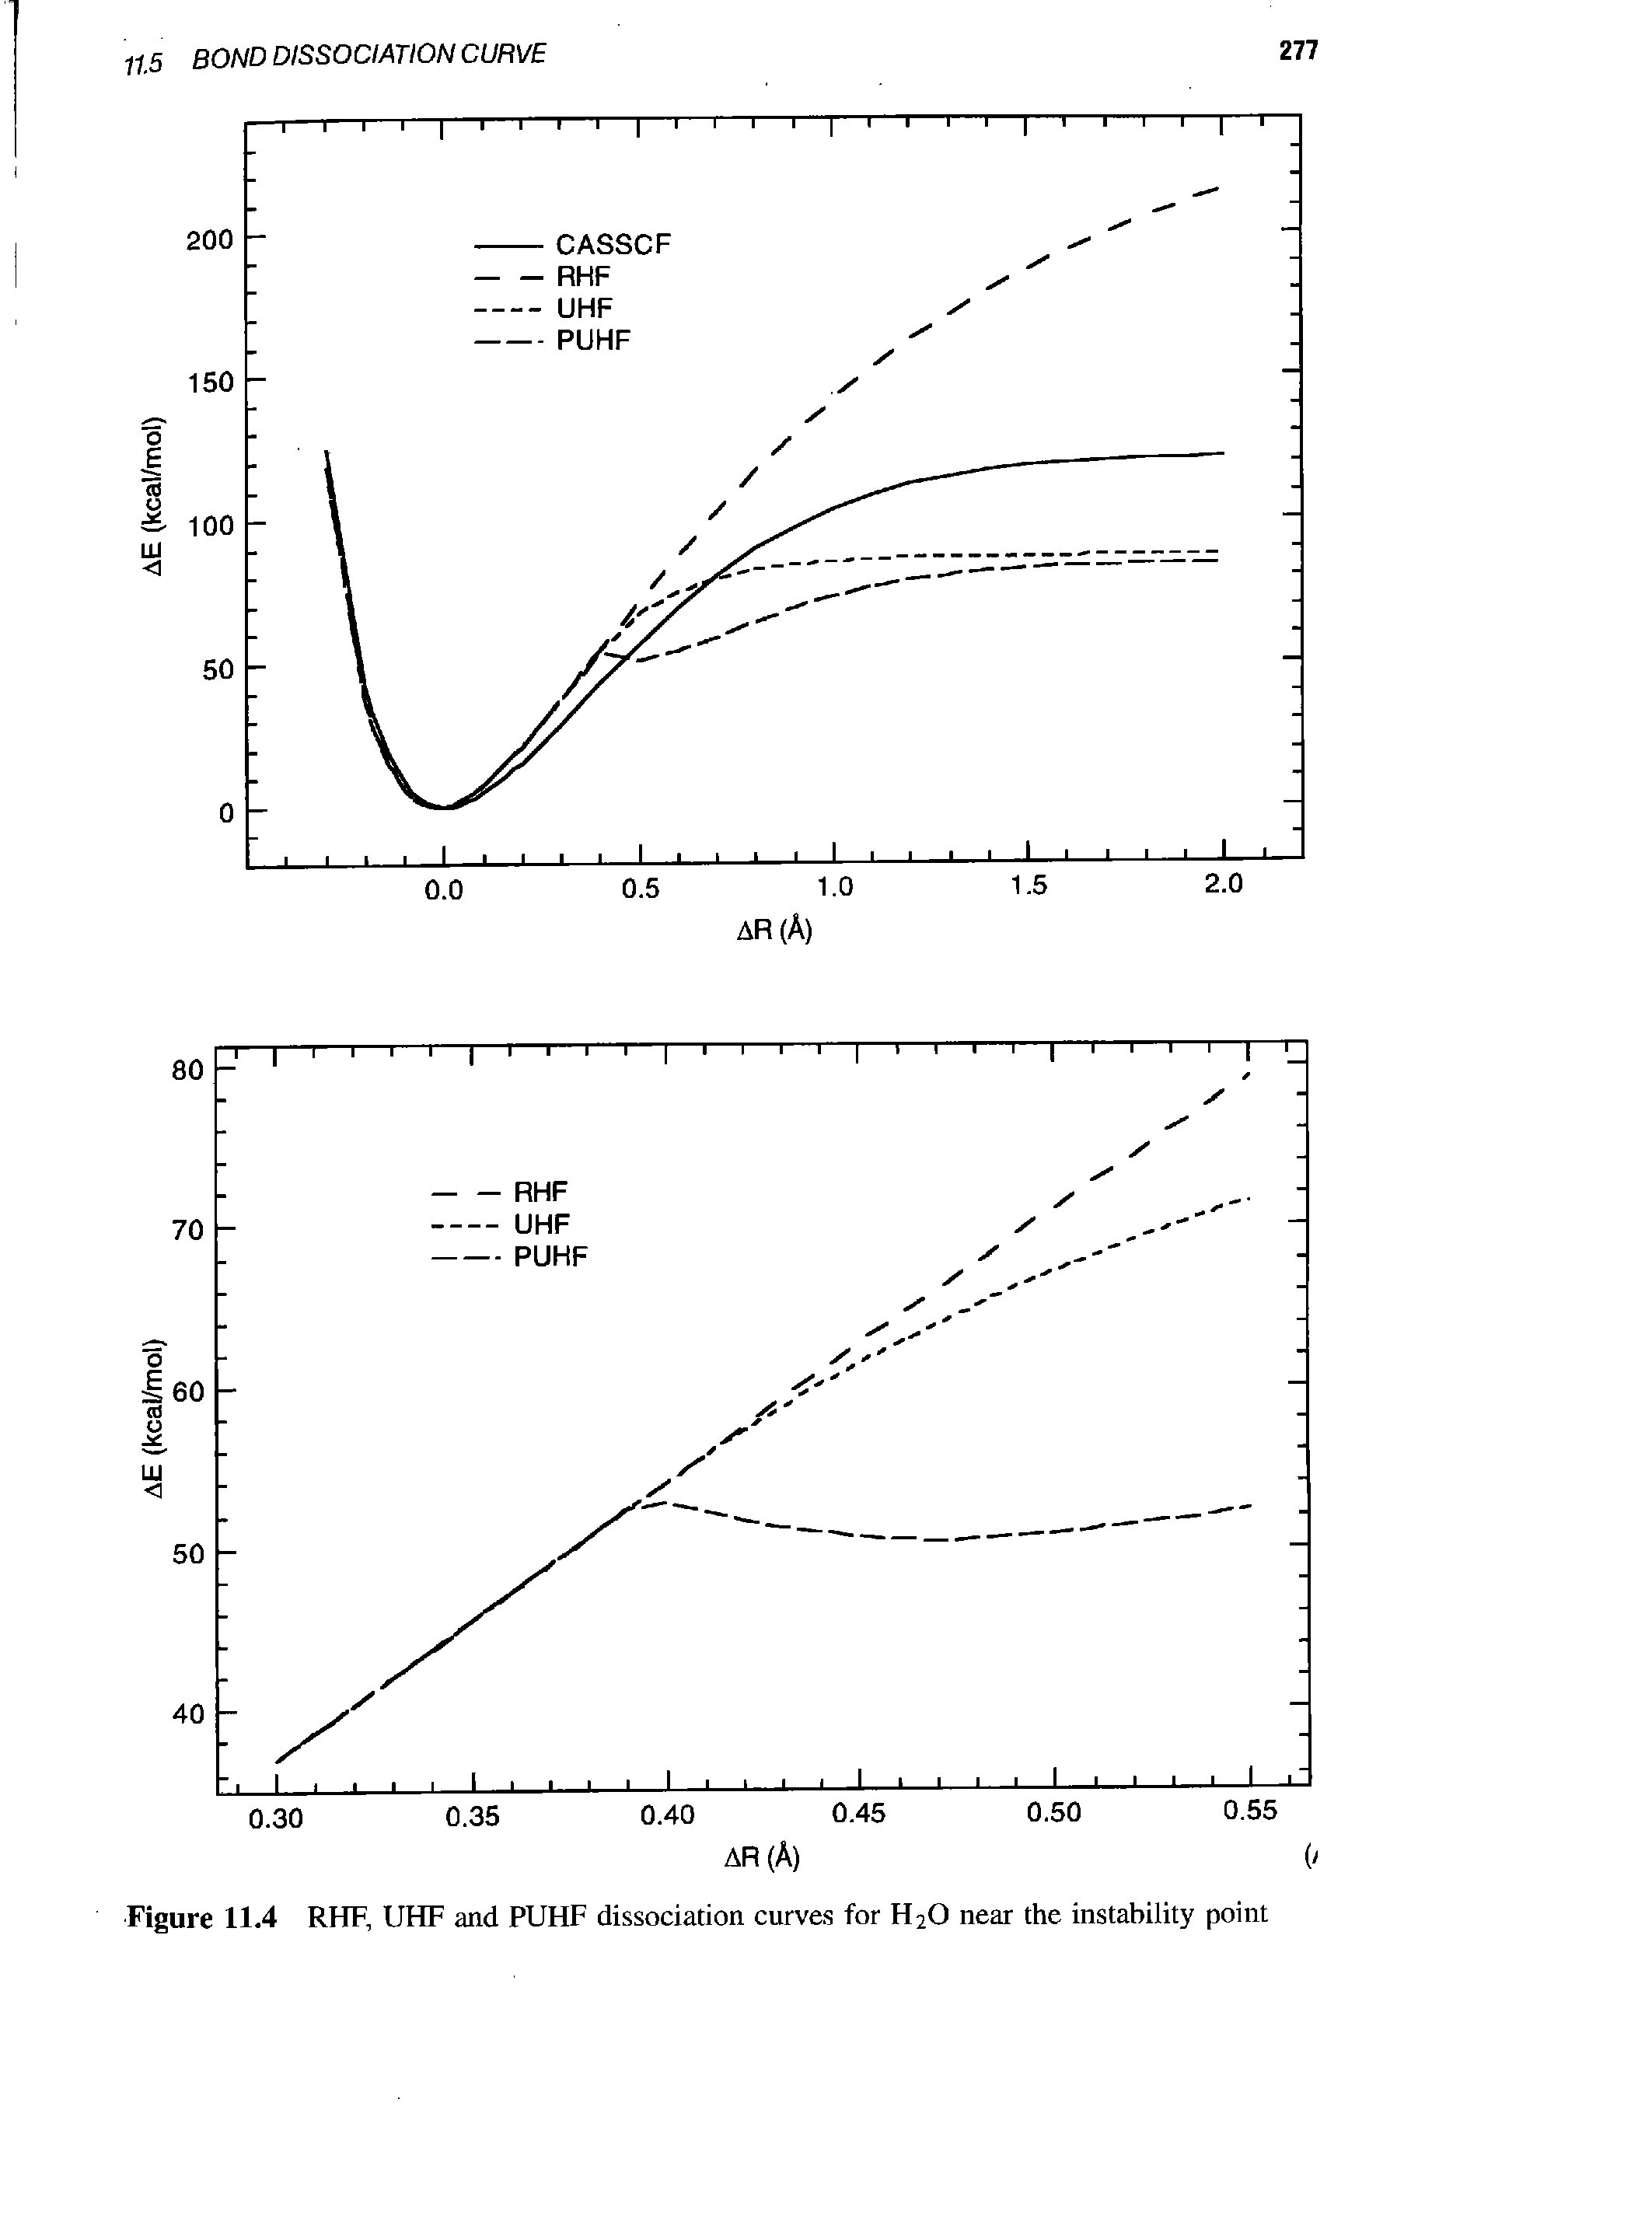 Figure 11.4 RHF, UHF and PUHF dissociation curves for H2O near the instability point...